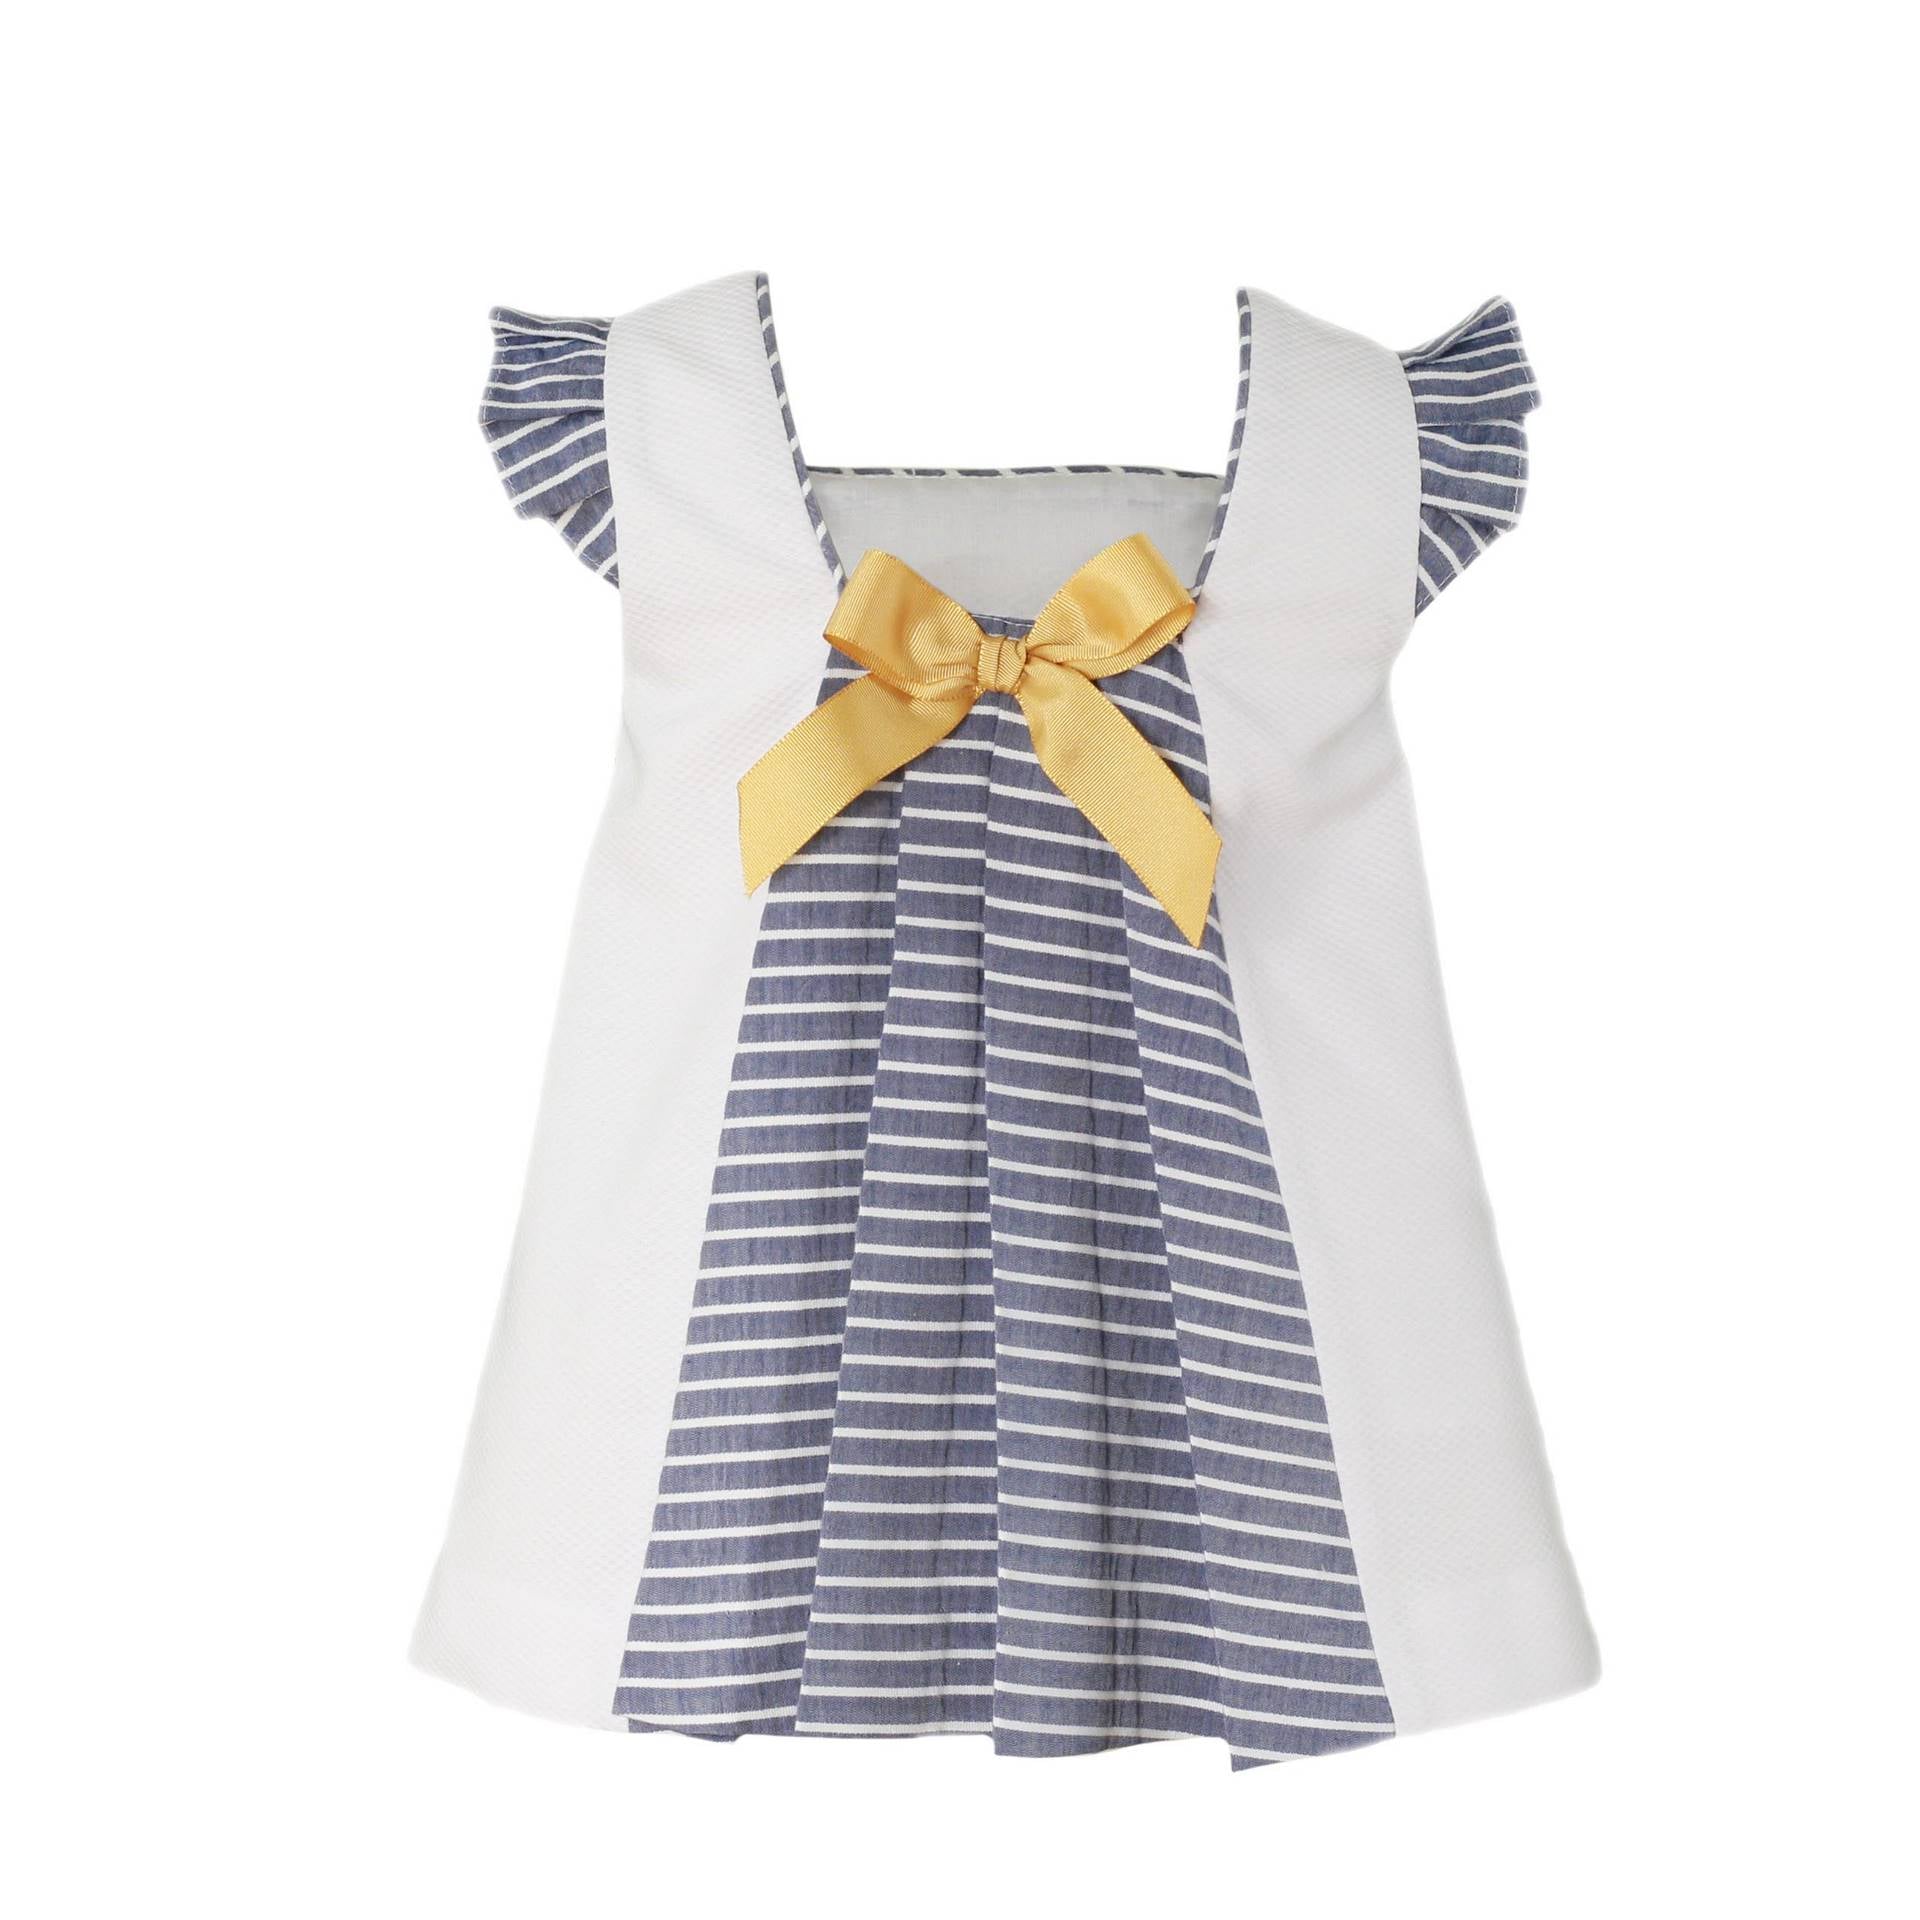 Formal White Dress with Yellow and Blue Stripes for Girls